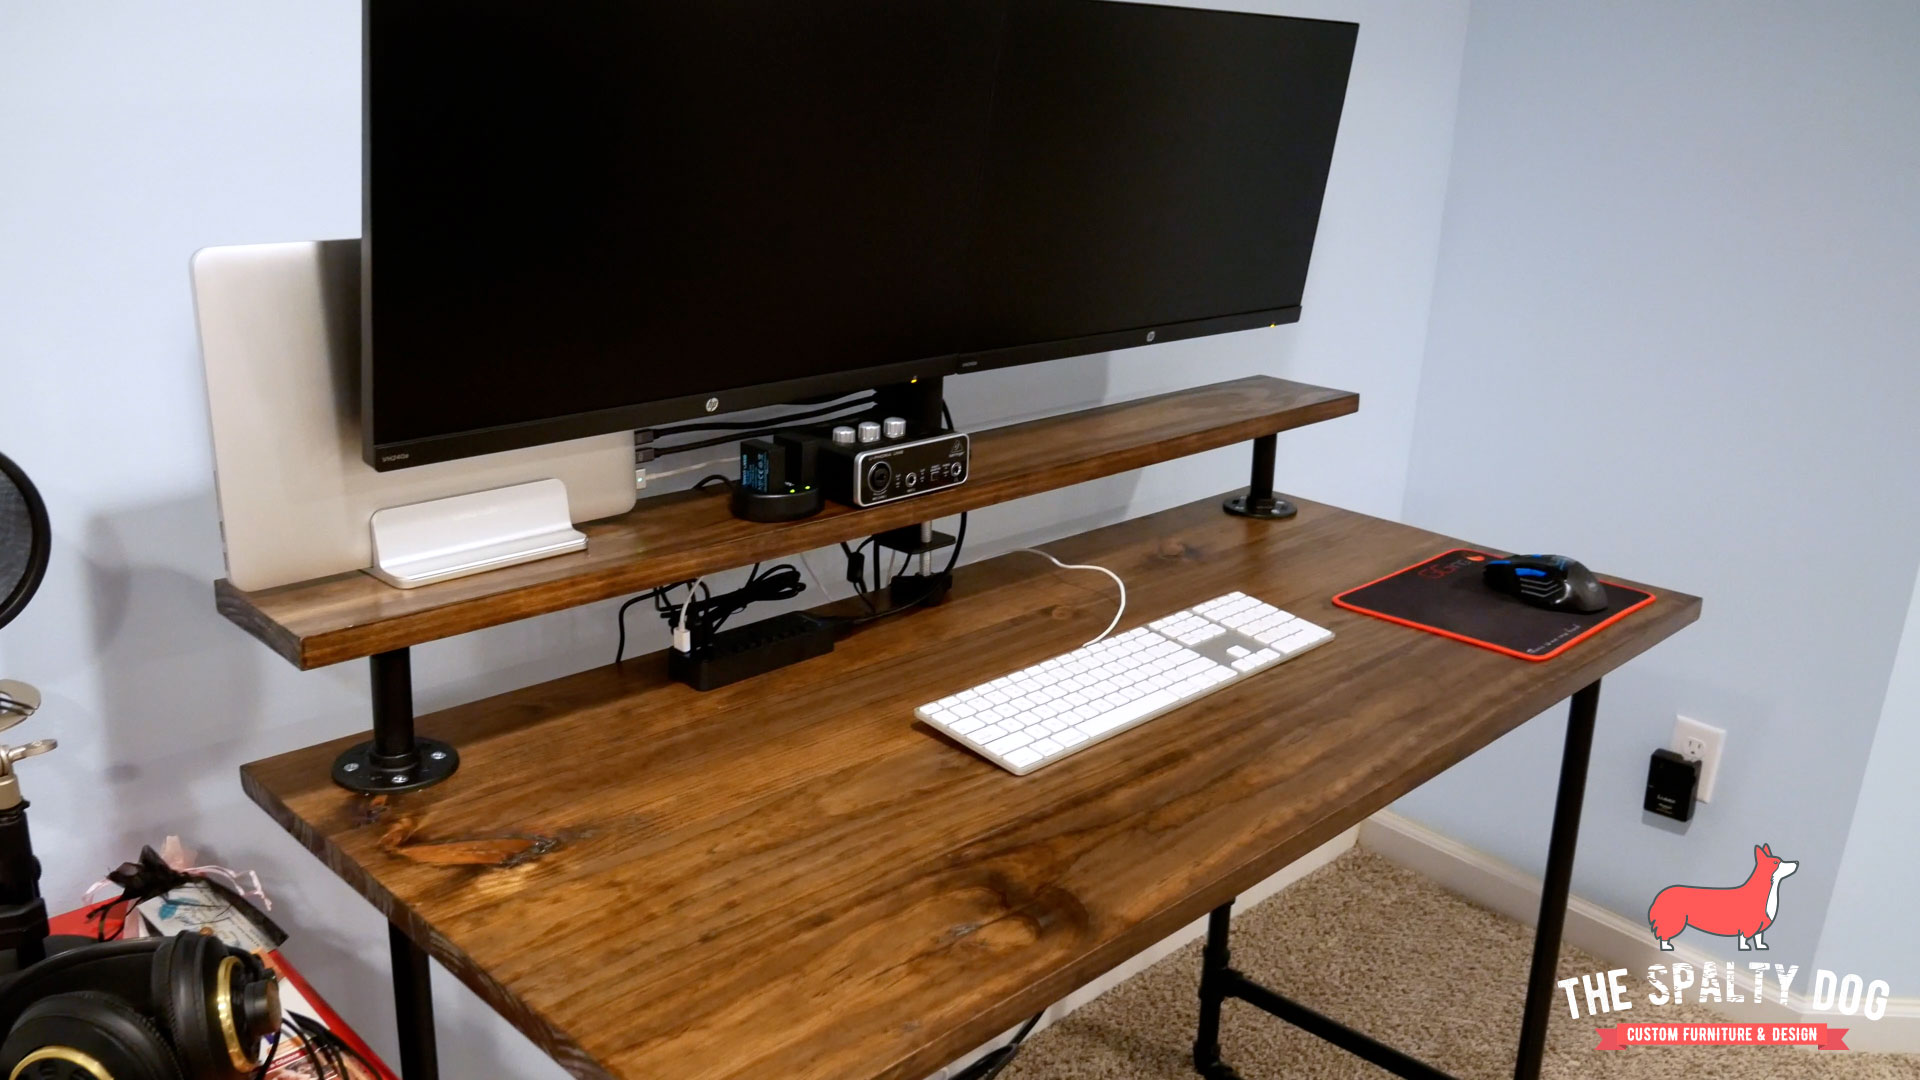 How To Build A Diy Industrial Pipe Desk The Spalty Dog